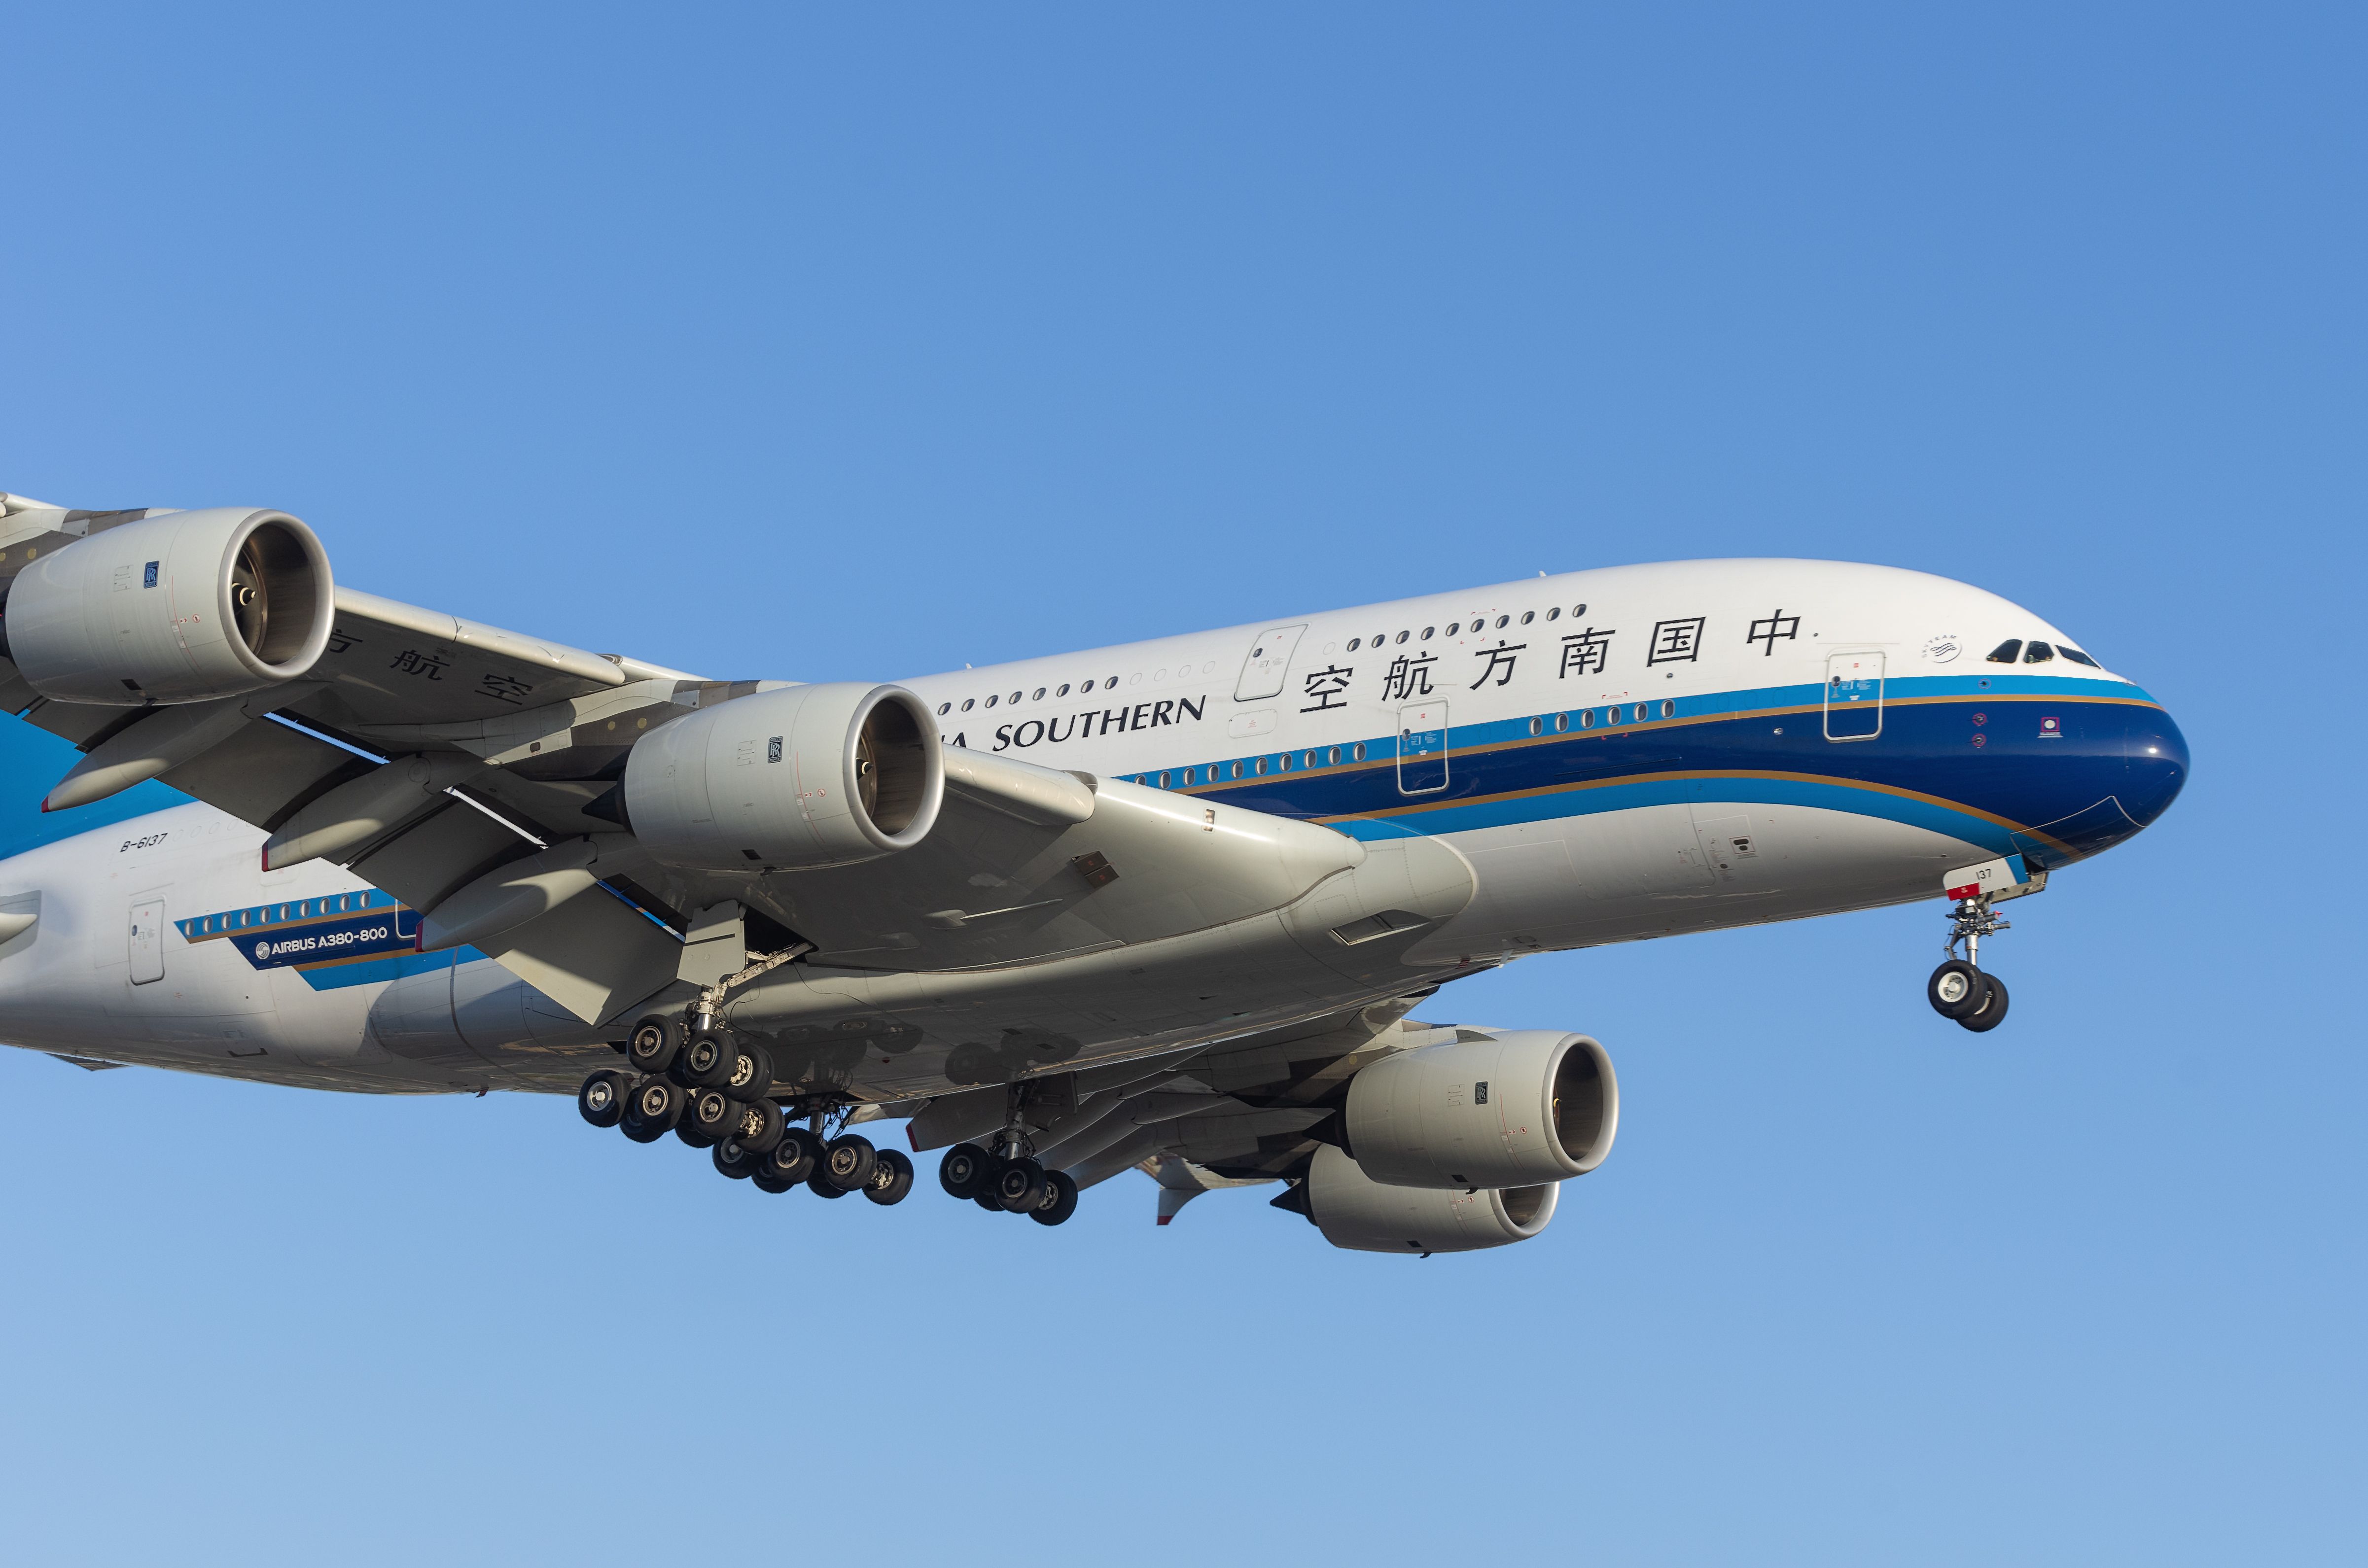 A China Southern Airlines Airbus A380 flying in the sky.